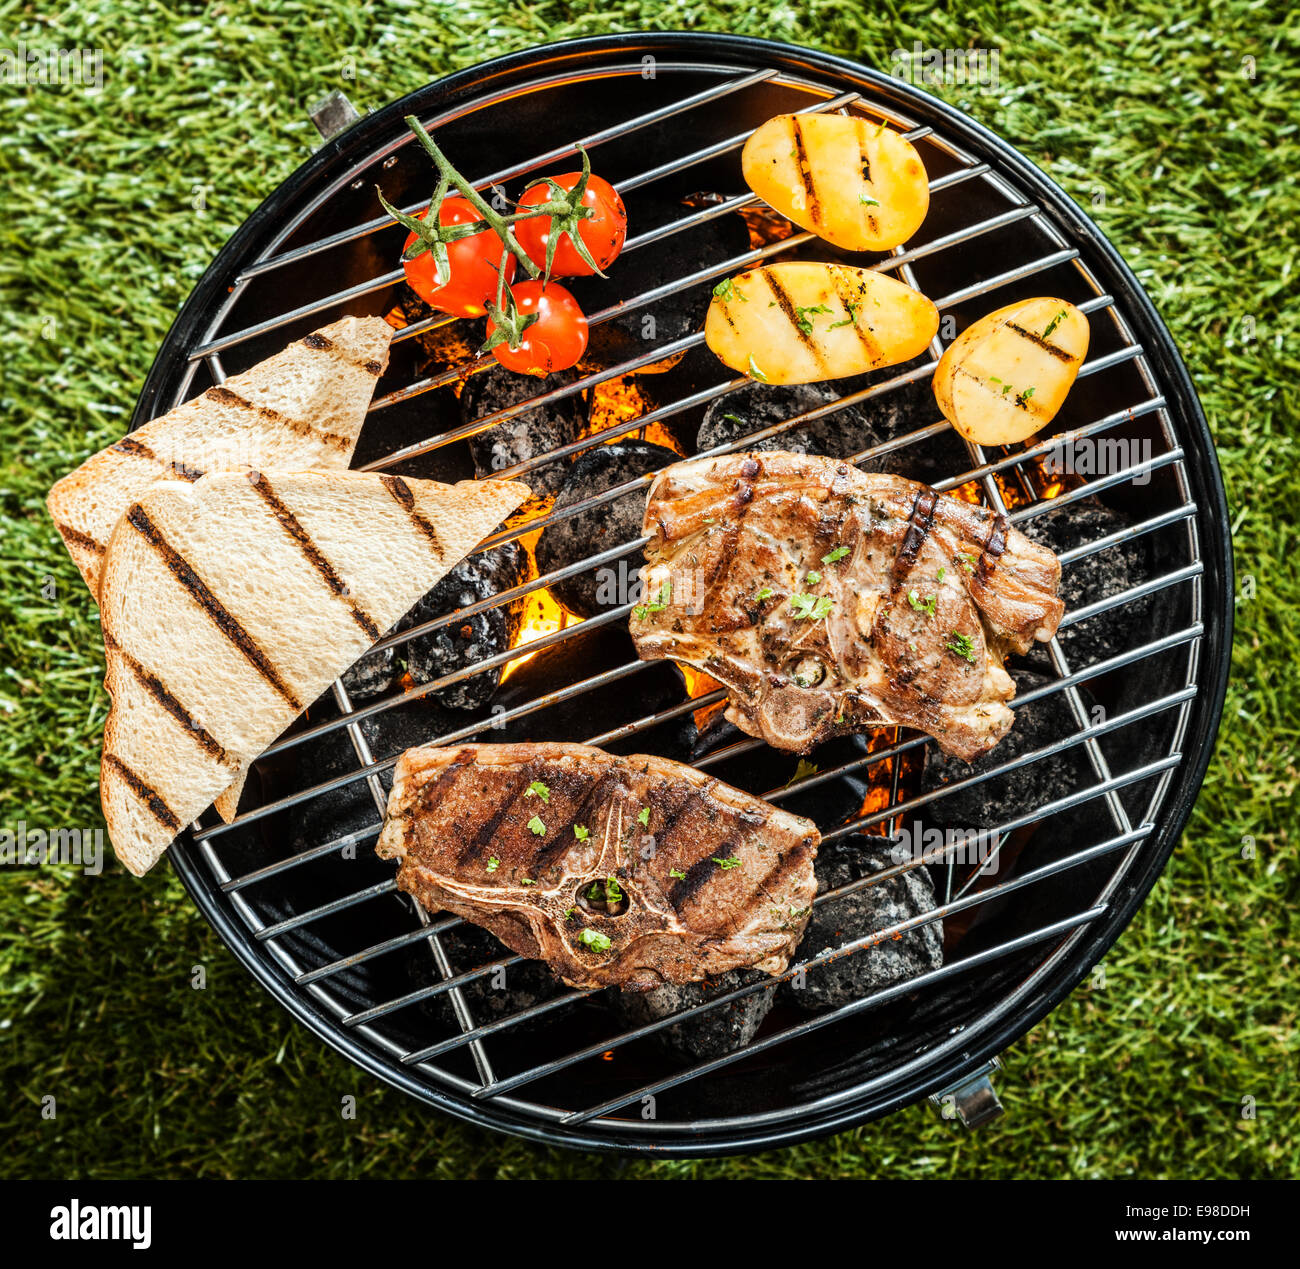 View from above of lamb chops and fresh vegetables grilling on a portable BBQ standing on grass at a summer picnic Stock Photo